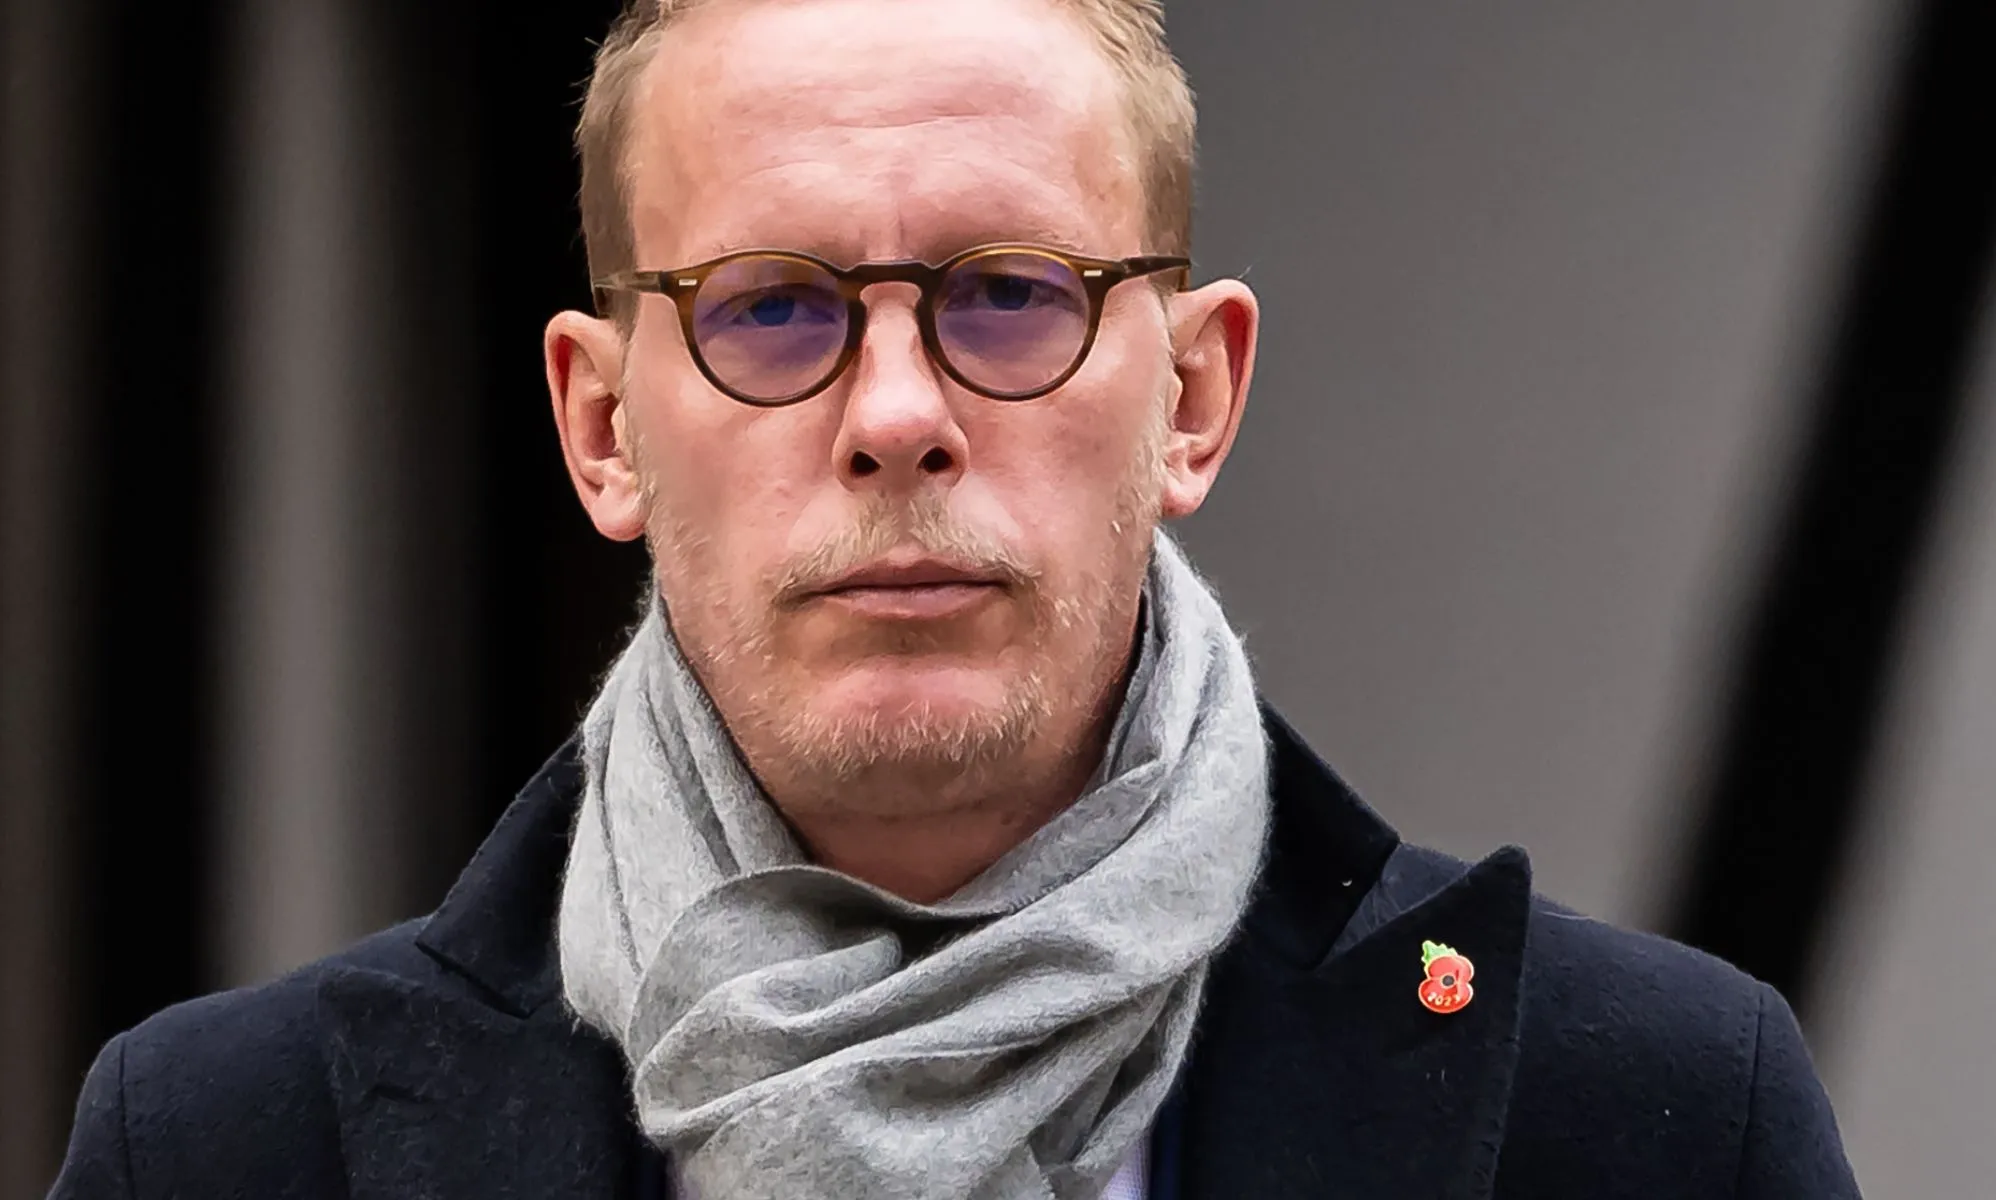 Laurence Fox ordered to pay £90,000 in libel damages to Drag Race star